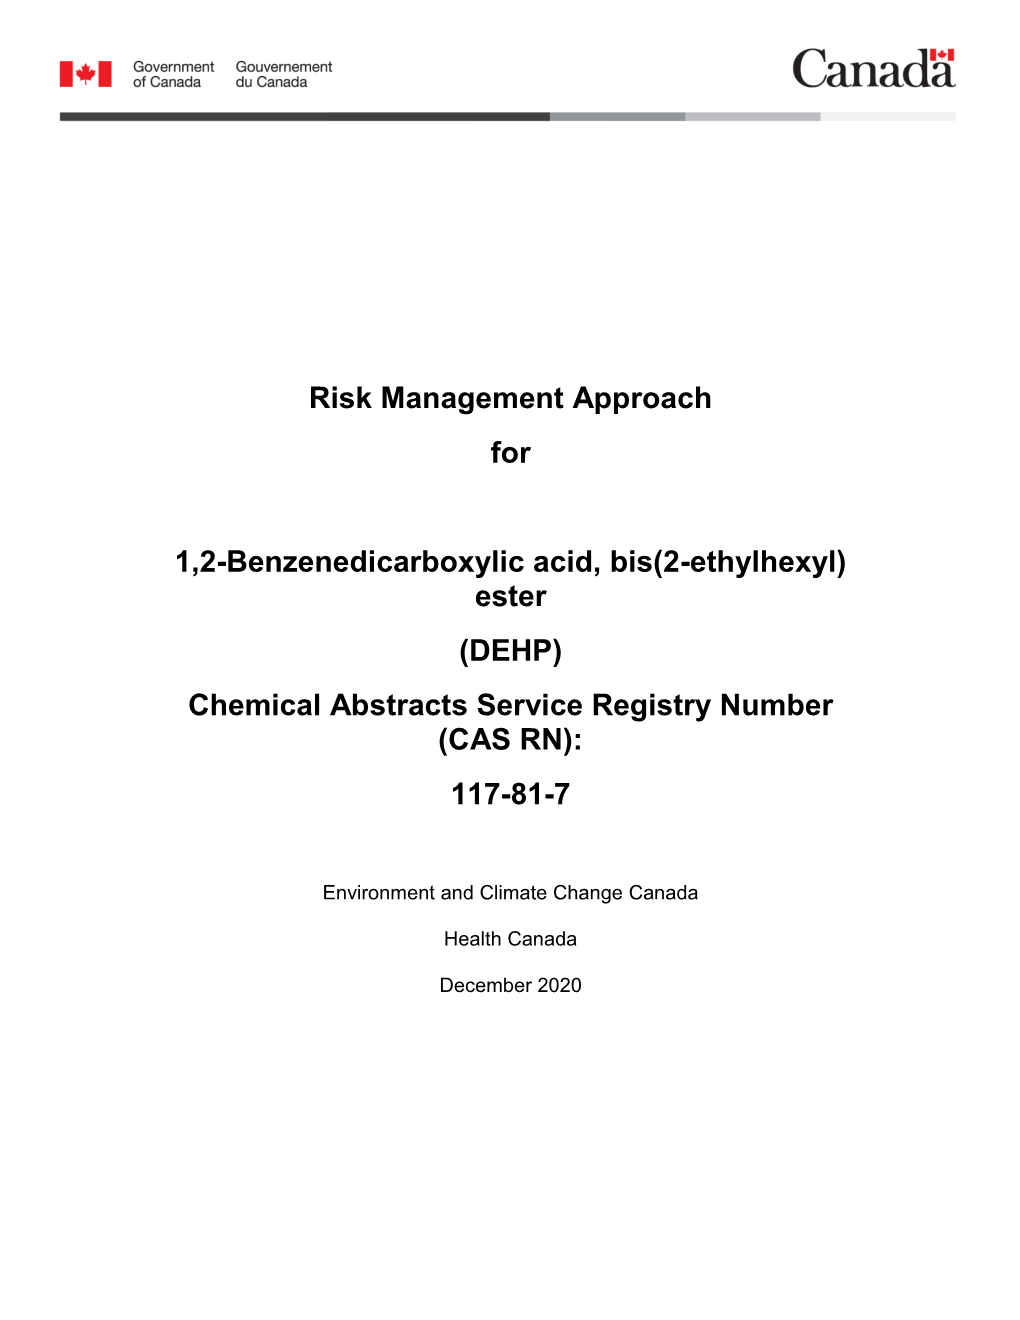 DEHP) Chemical Abstracts Service Registry Number (CAS RN): 117-81-7